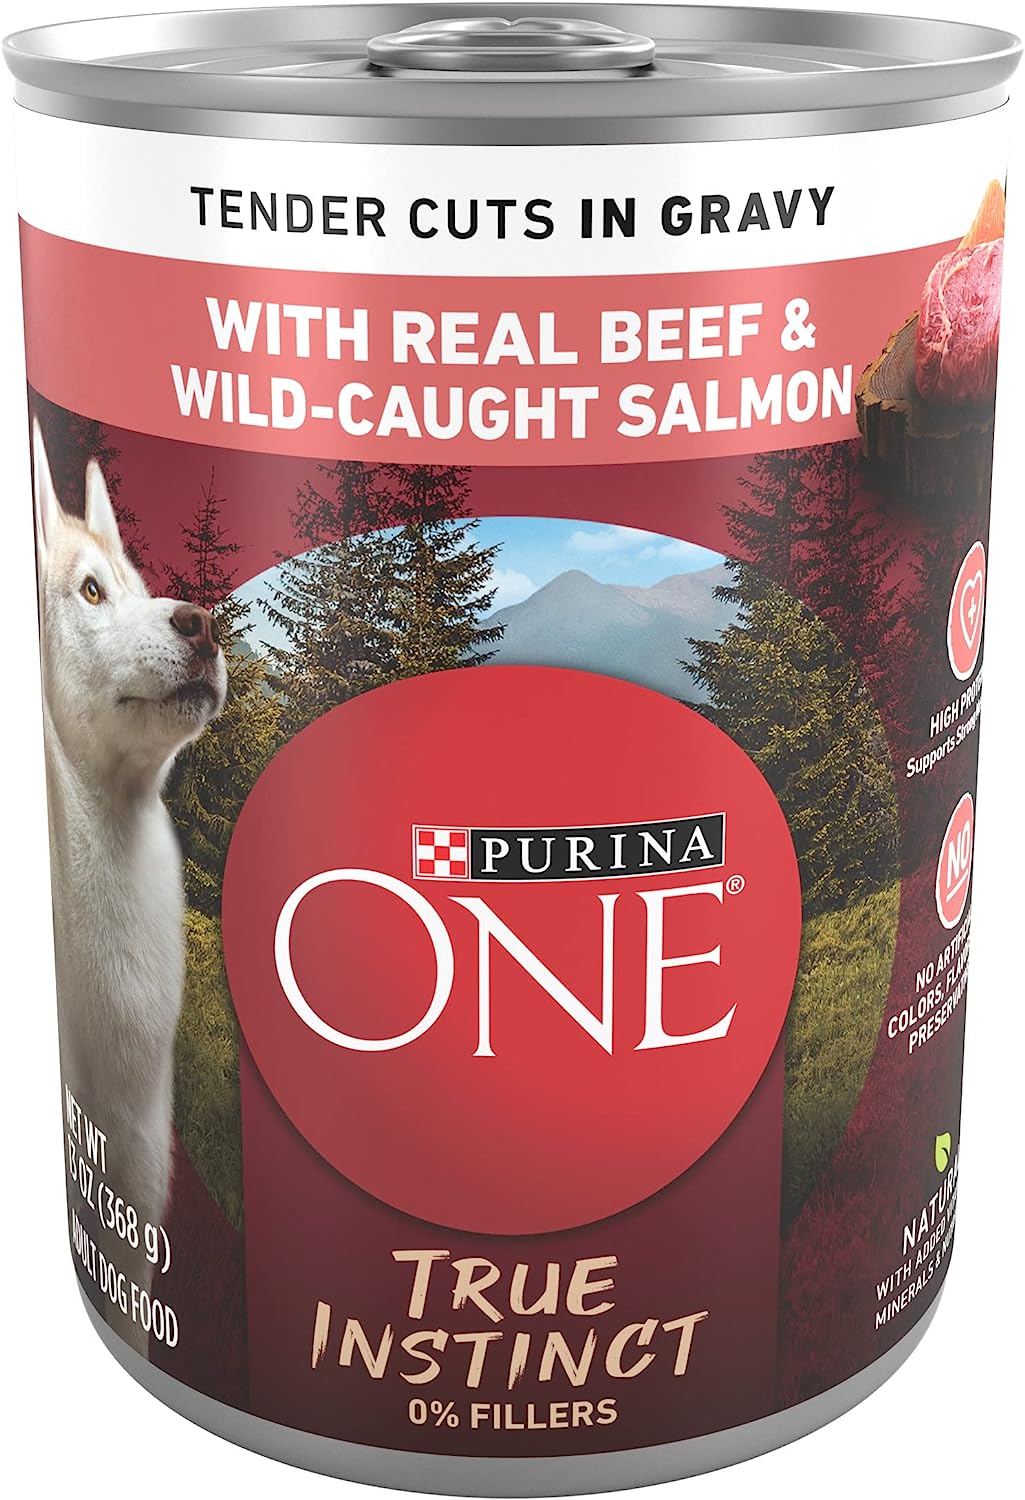 Wholesale prices with free shipping all over United States Purina ONE True Instinct Tender Cuts in Gravy With Real Turkey and Venison, and With Real Chicken and Duck High Protein Wet Dog Food Variety Pack - Steven Deals